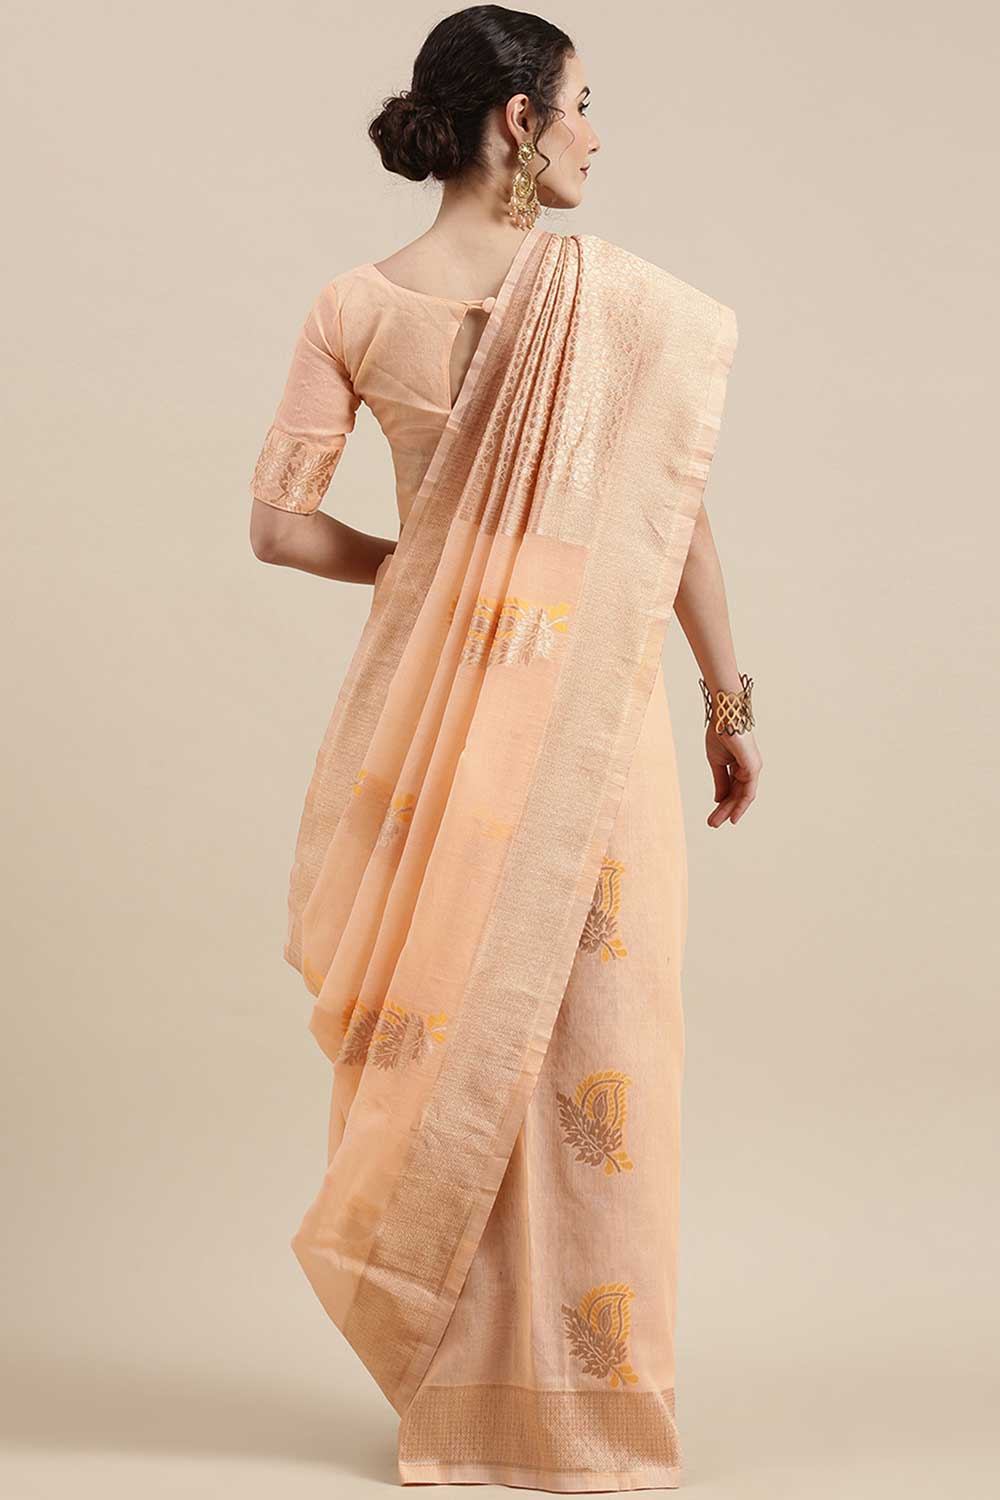 Shop Krish Peach Floral Woven Linen One Minute Saree at best offer at our  Store - One Minute Saree